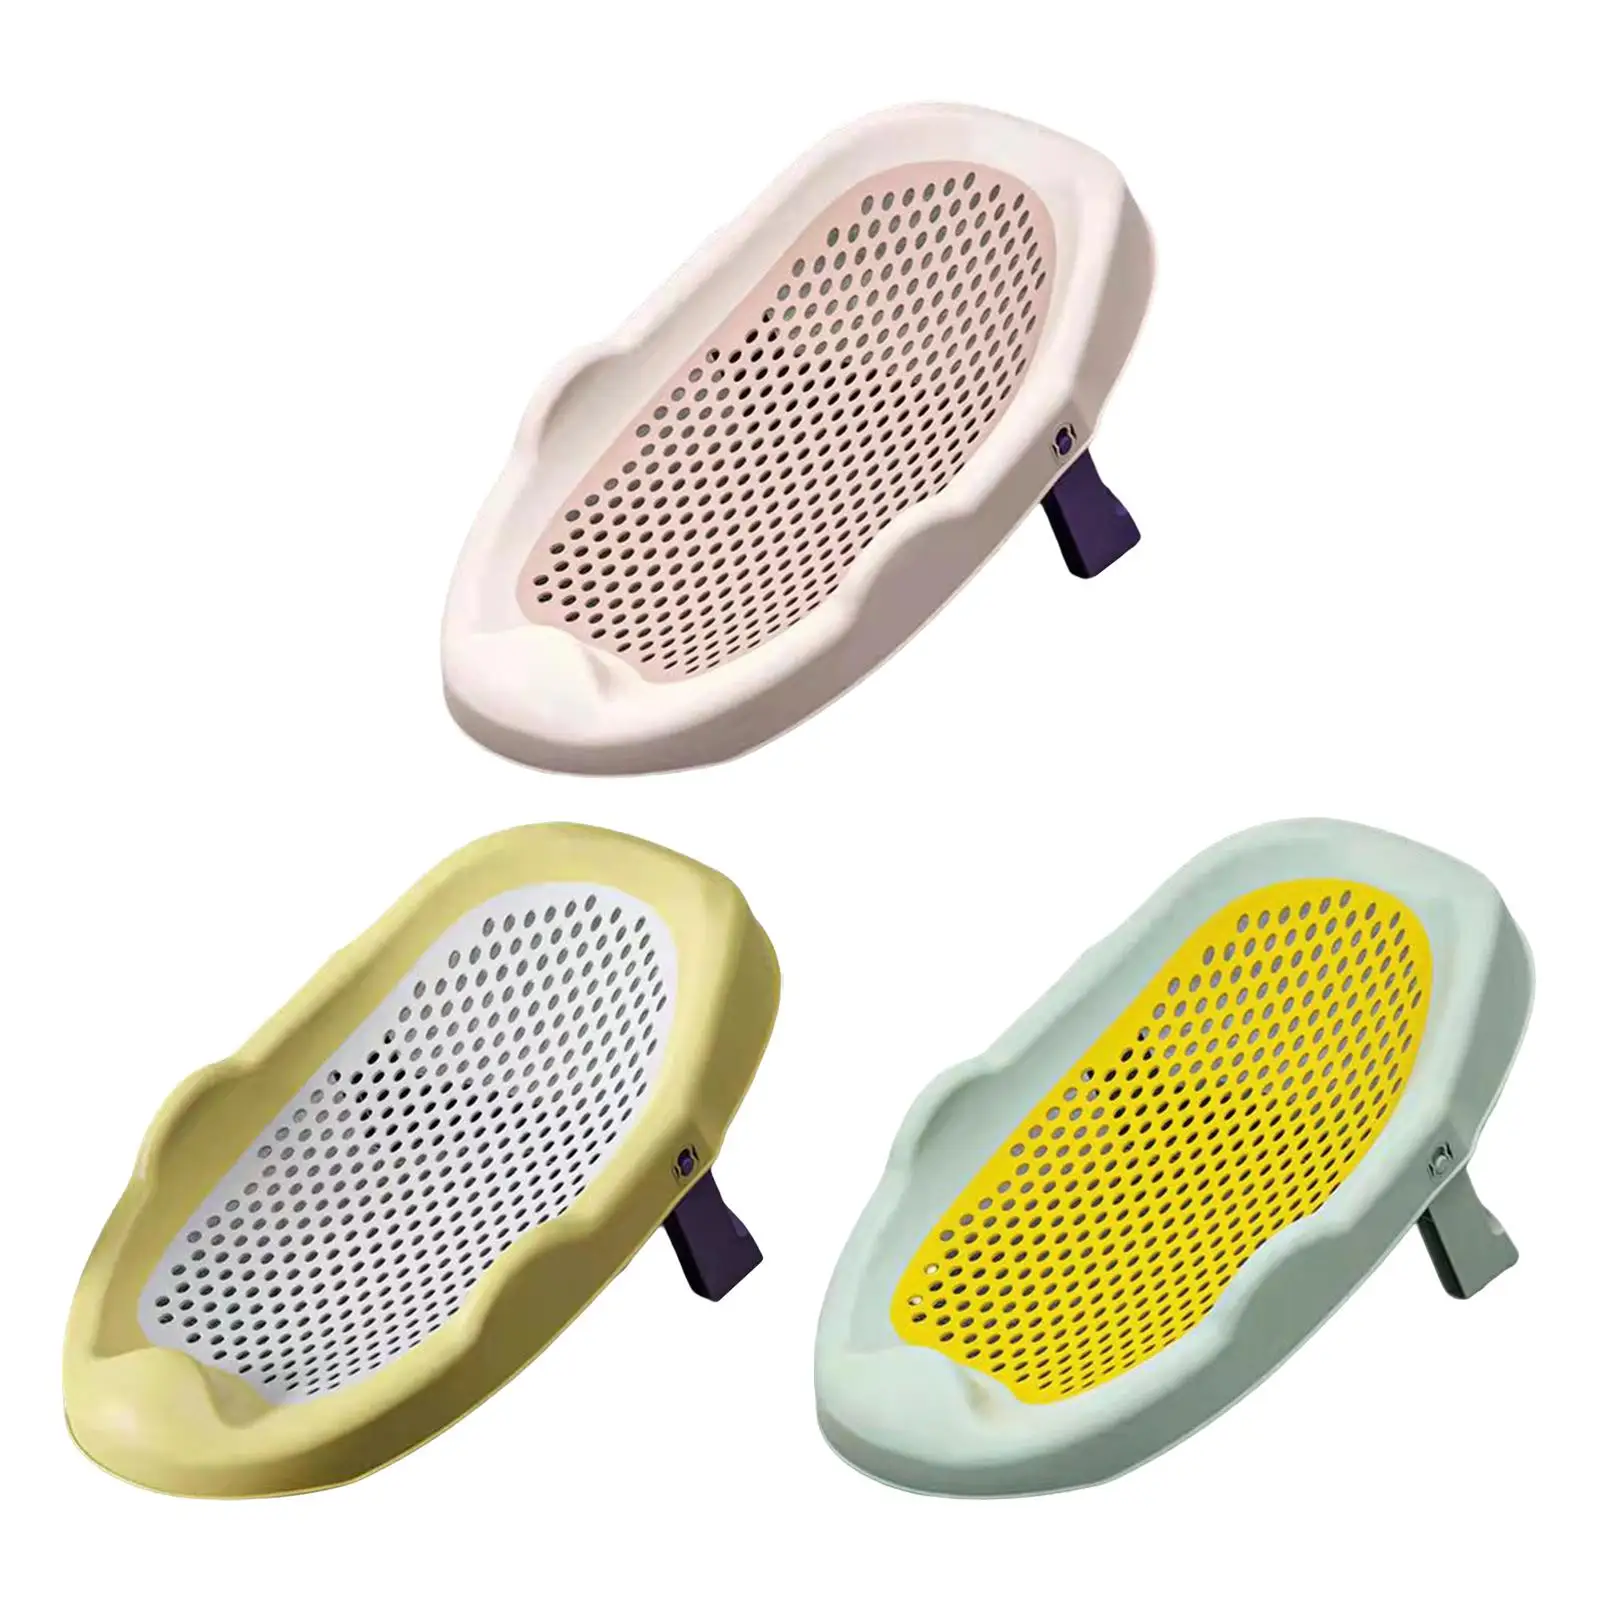 Seat Adjustable Non Slip Bathtub Breathable Foldable for Toddlers